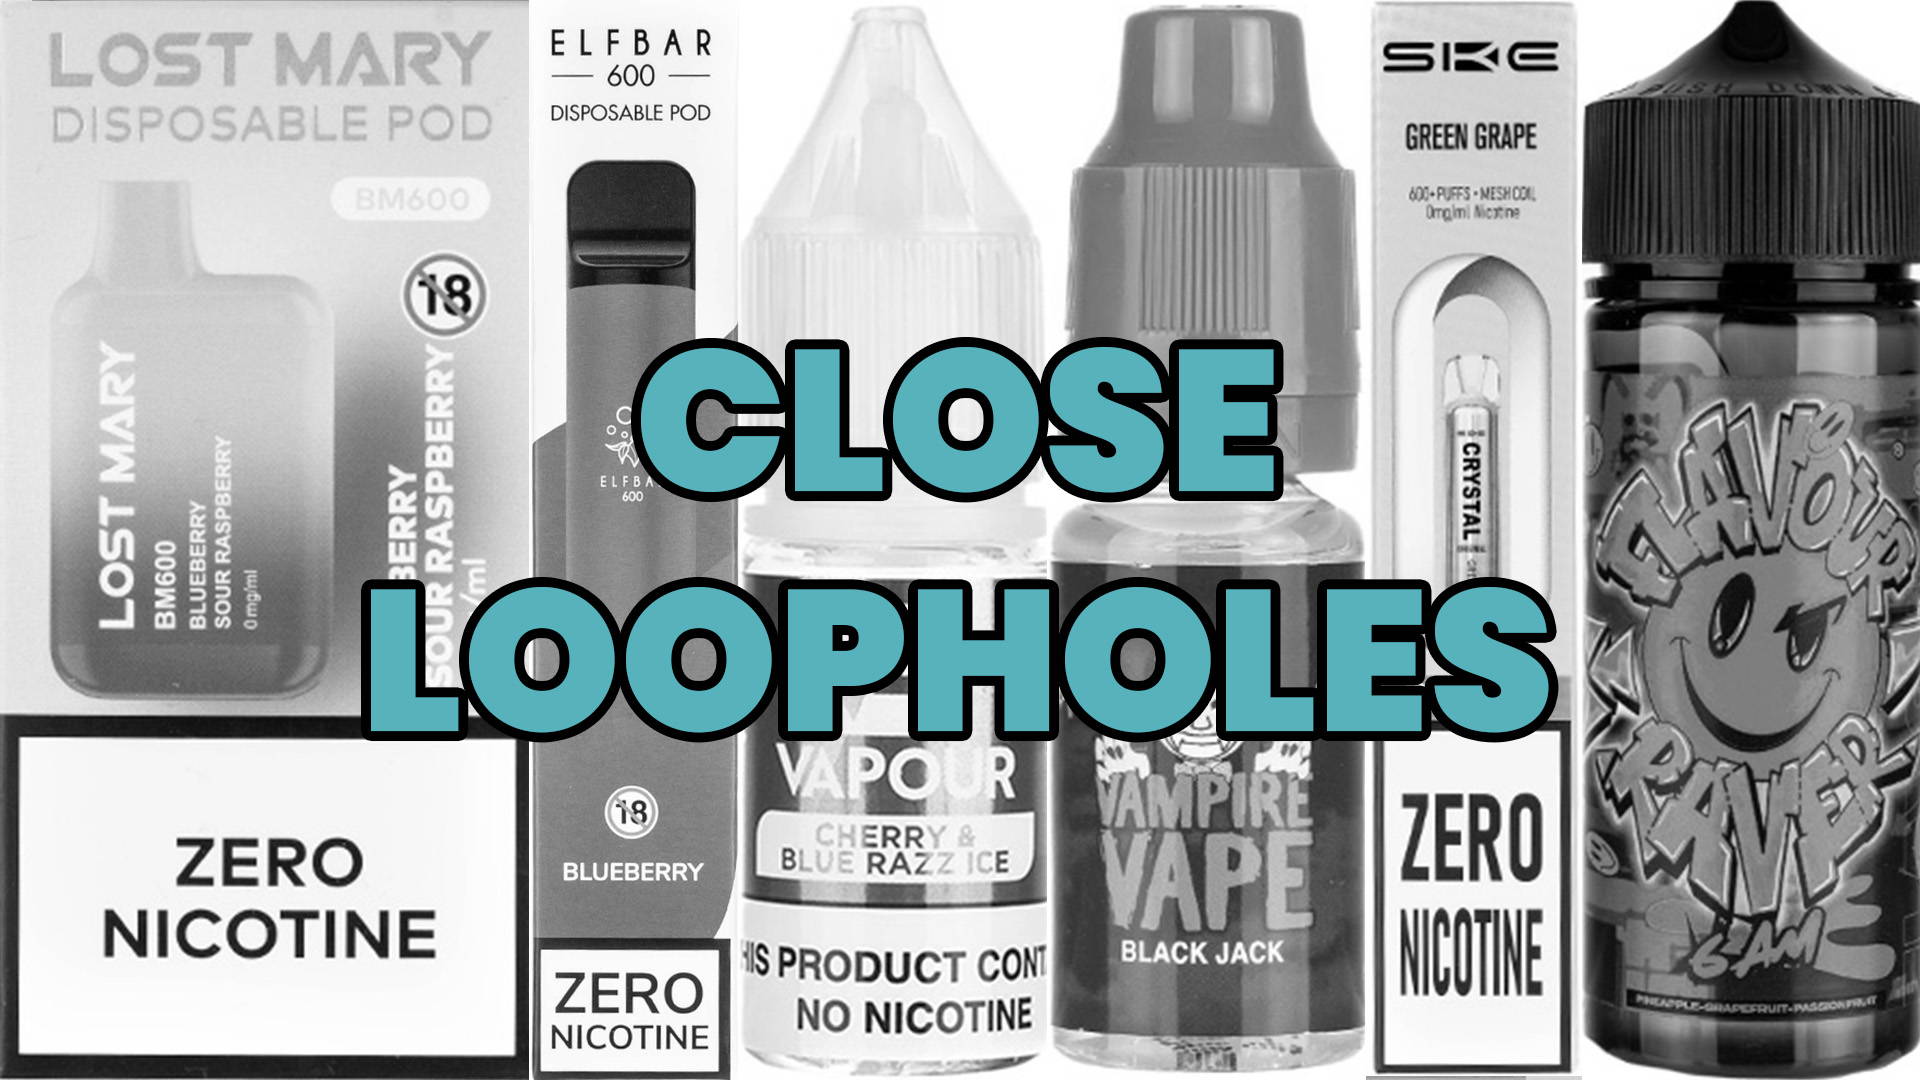 An image of zero nicotine e-liquid with the words 'close loopholes' written over it.